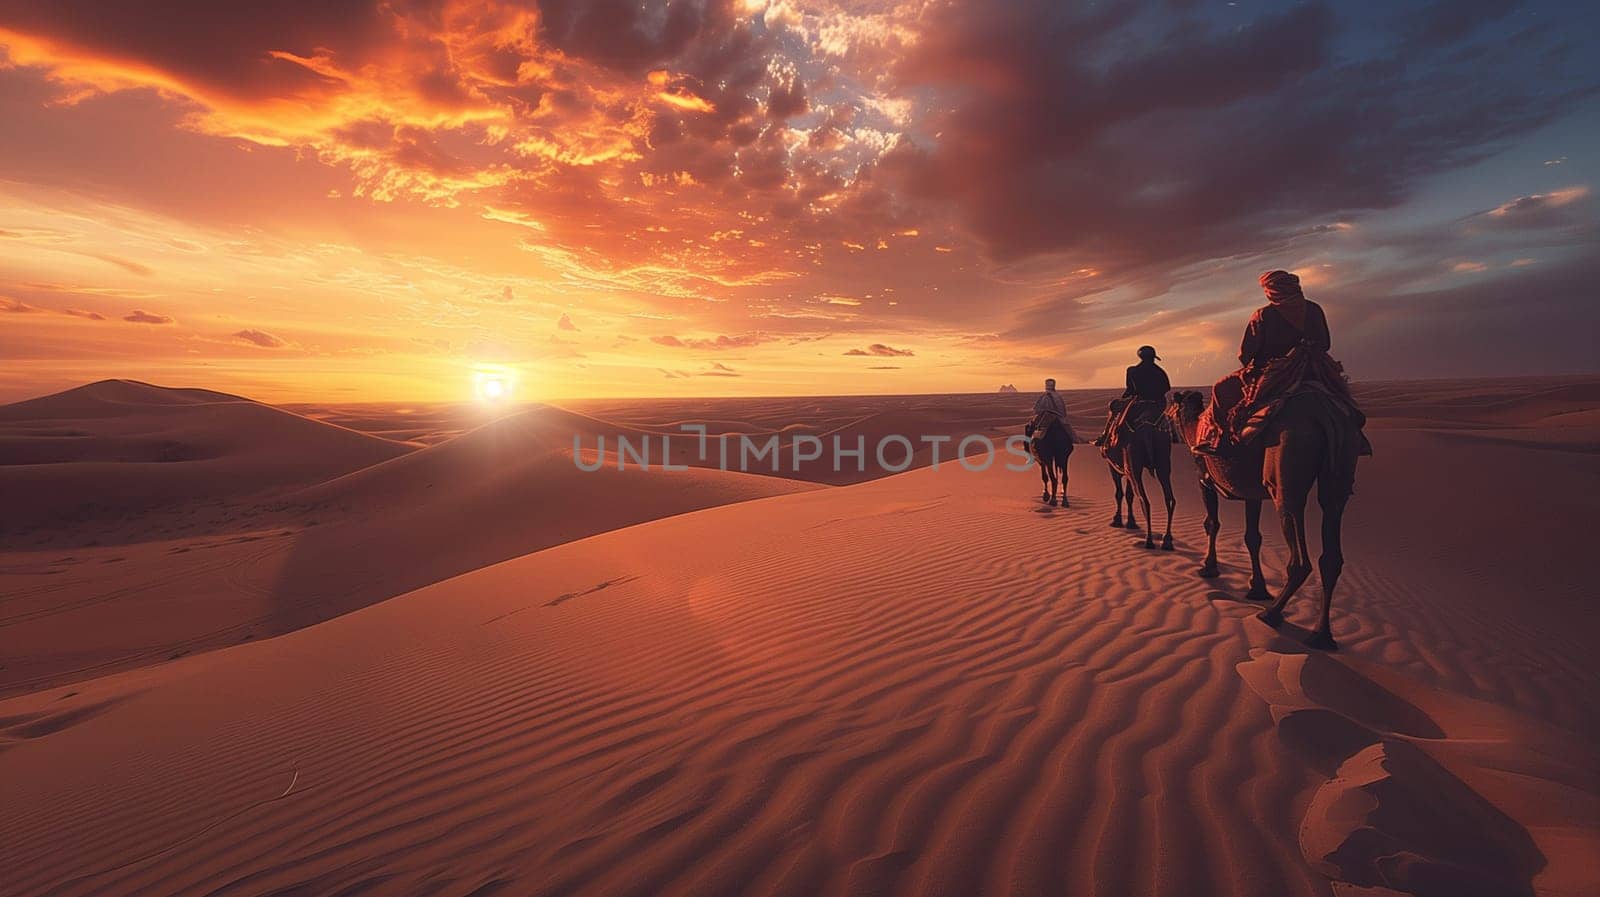 Sand dunes and camels by NeuroSky